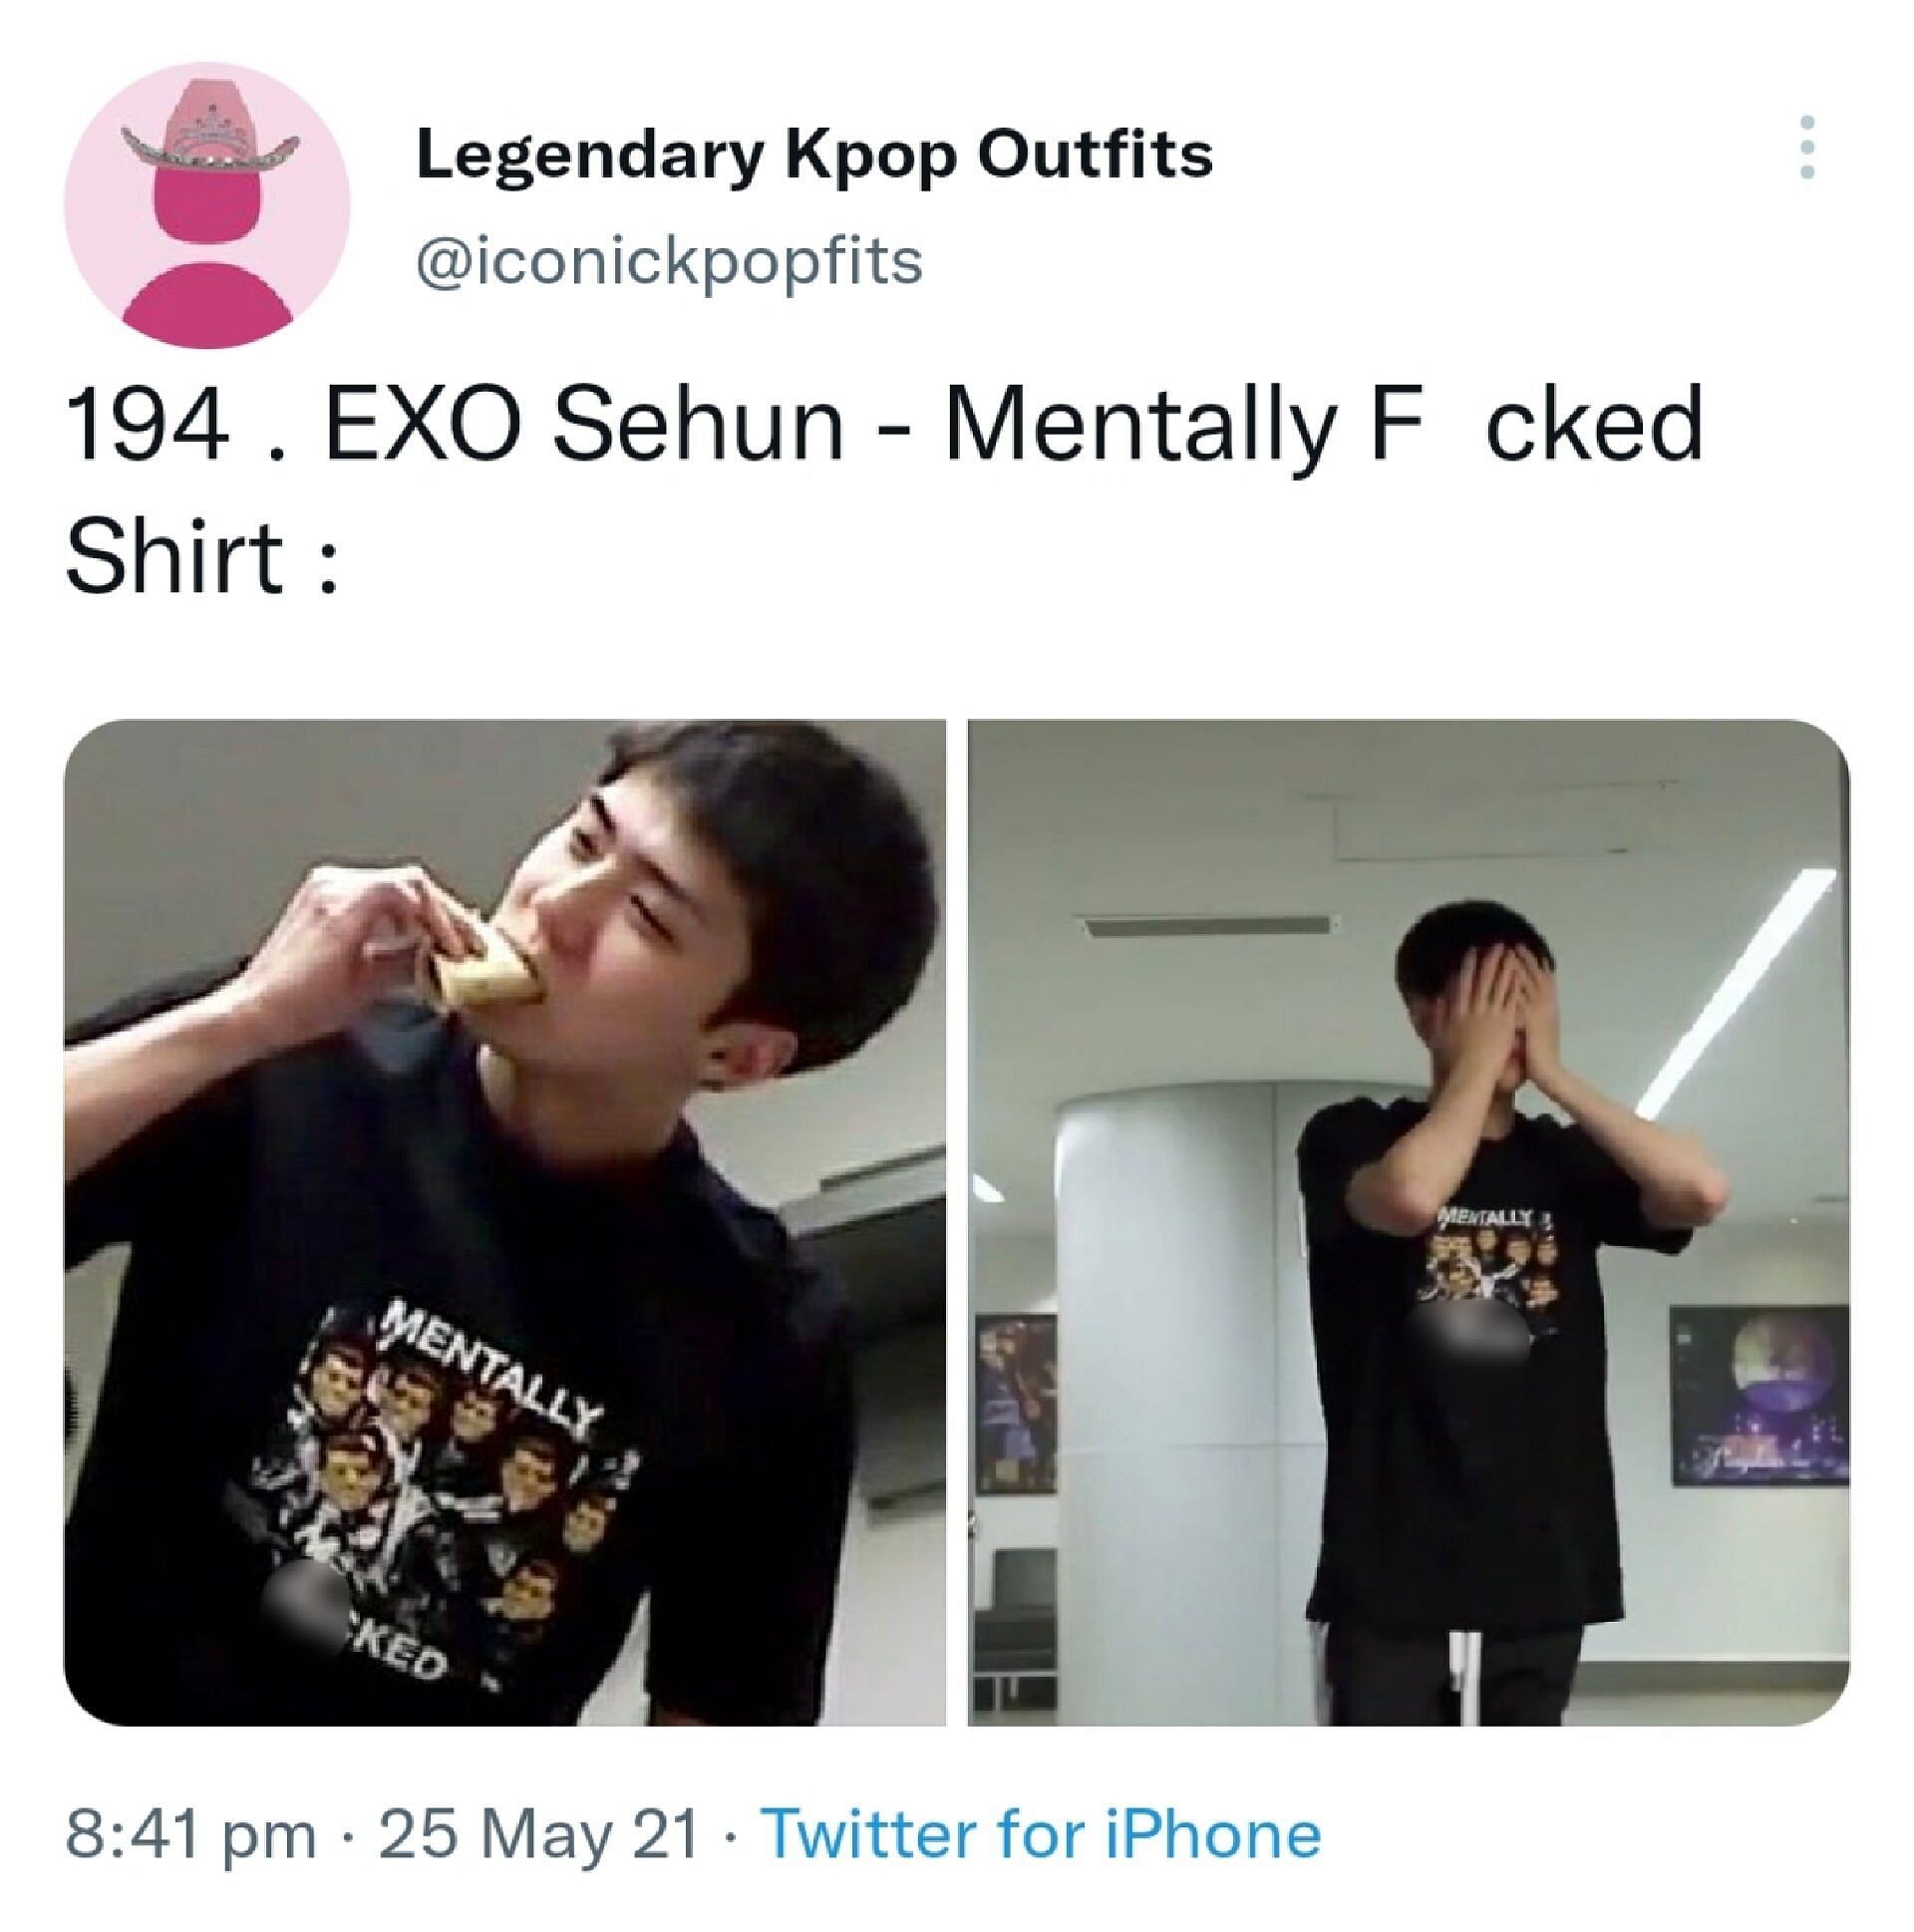 Sehun wearing a t-shirt that says &quot;Mentally F*cked&quot;